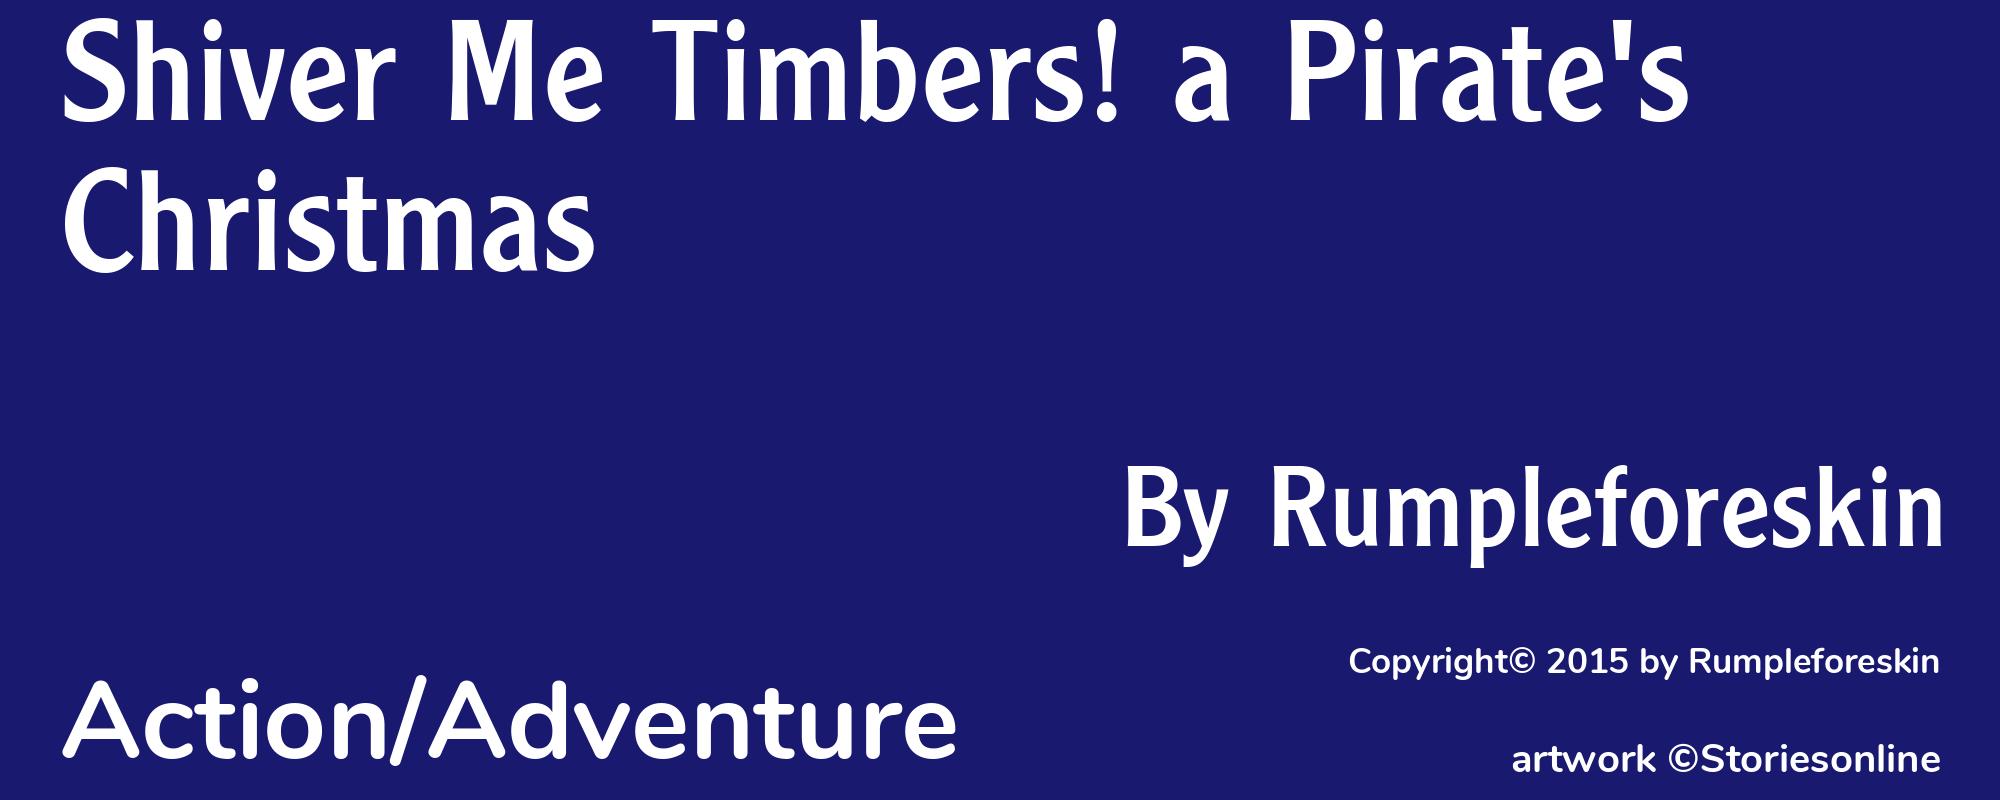 Shiver Me Timbers! a Pirate's Christmas - Cover